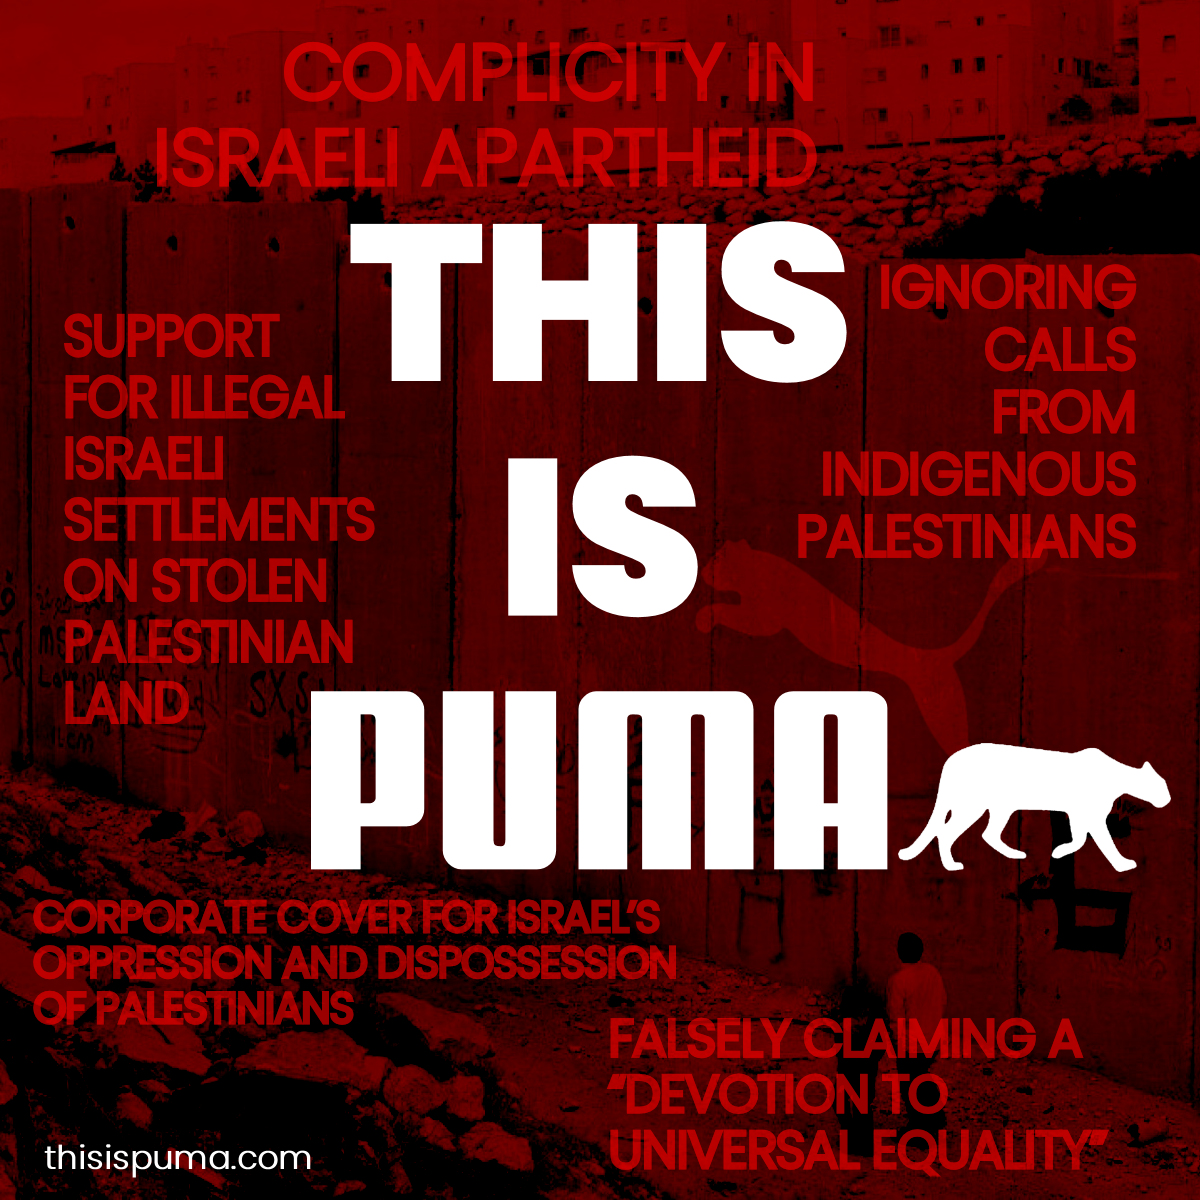 Palestinians have asked @PUMA to stop its involvement in the violation of their rights. But PUMA is ignoring them.

Discover how PUMA supports Israel’s human rights abuses and #BoycottPUMA 👇

thisispuma.com

#ThisIsPuma #ForeverFaster